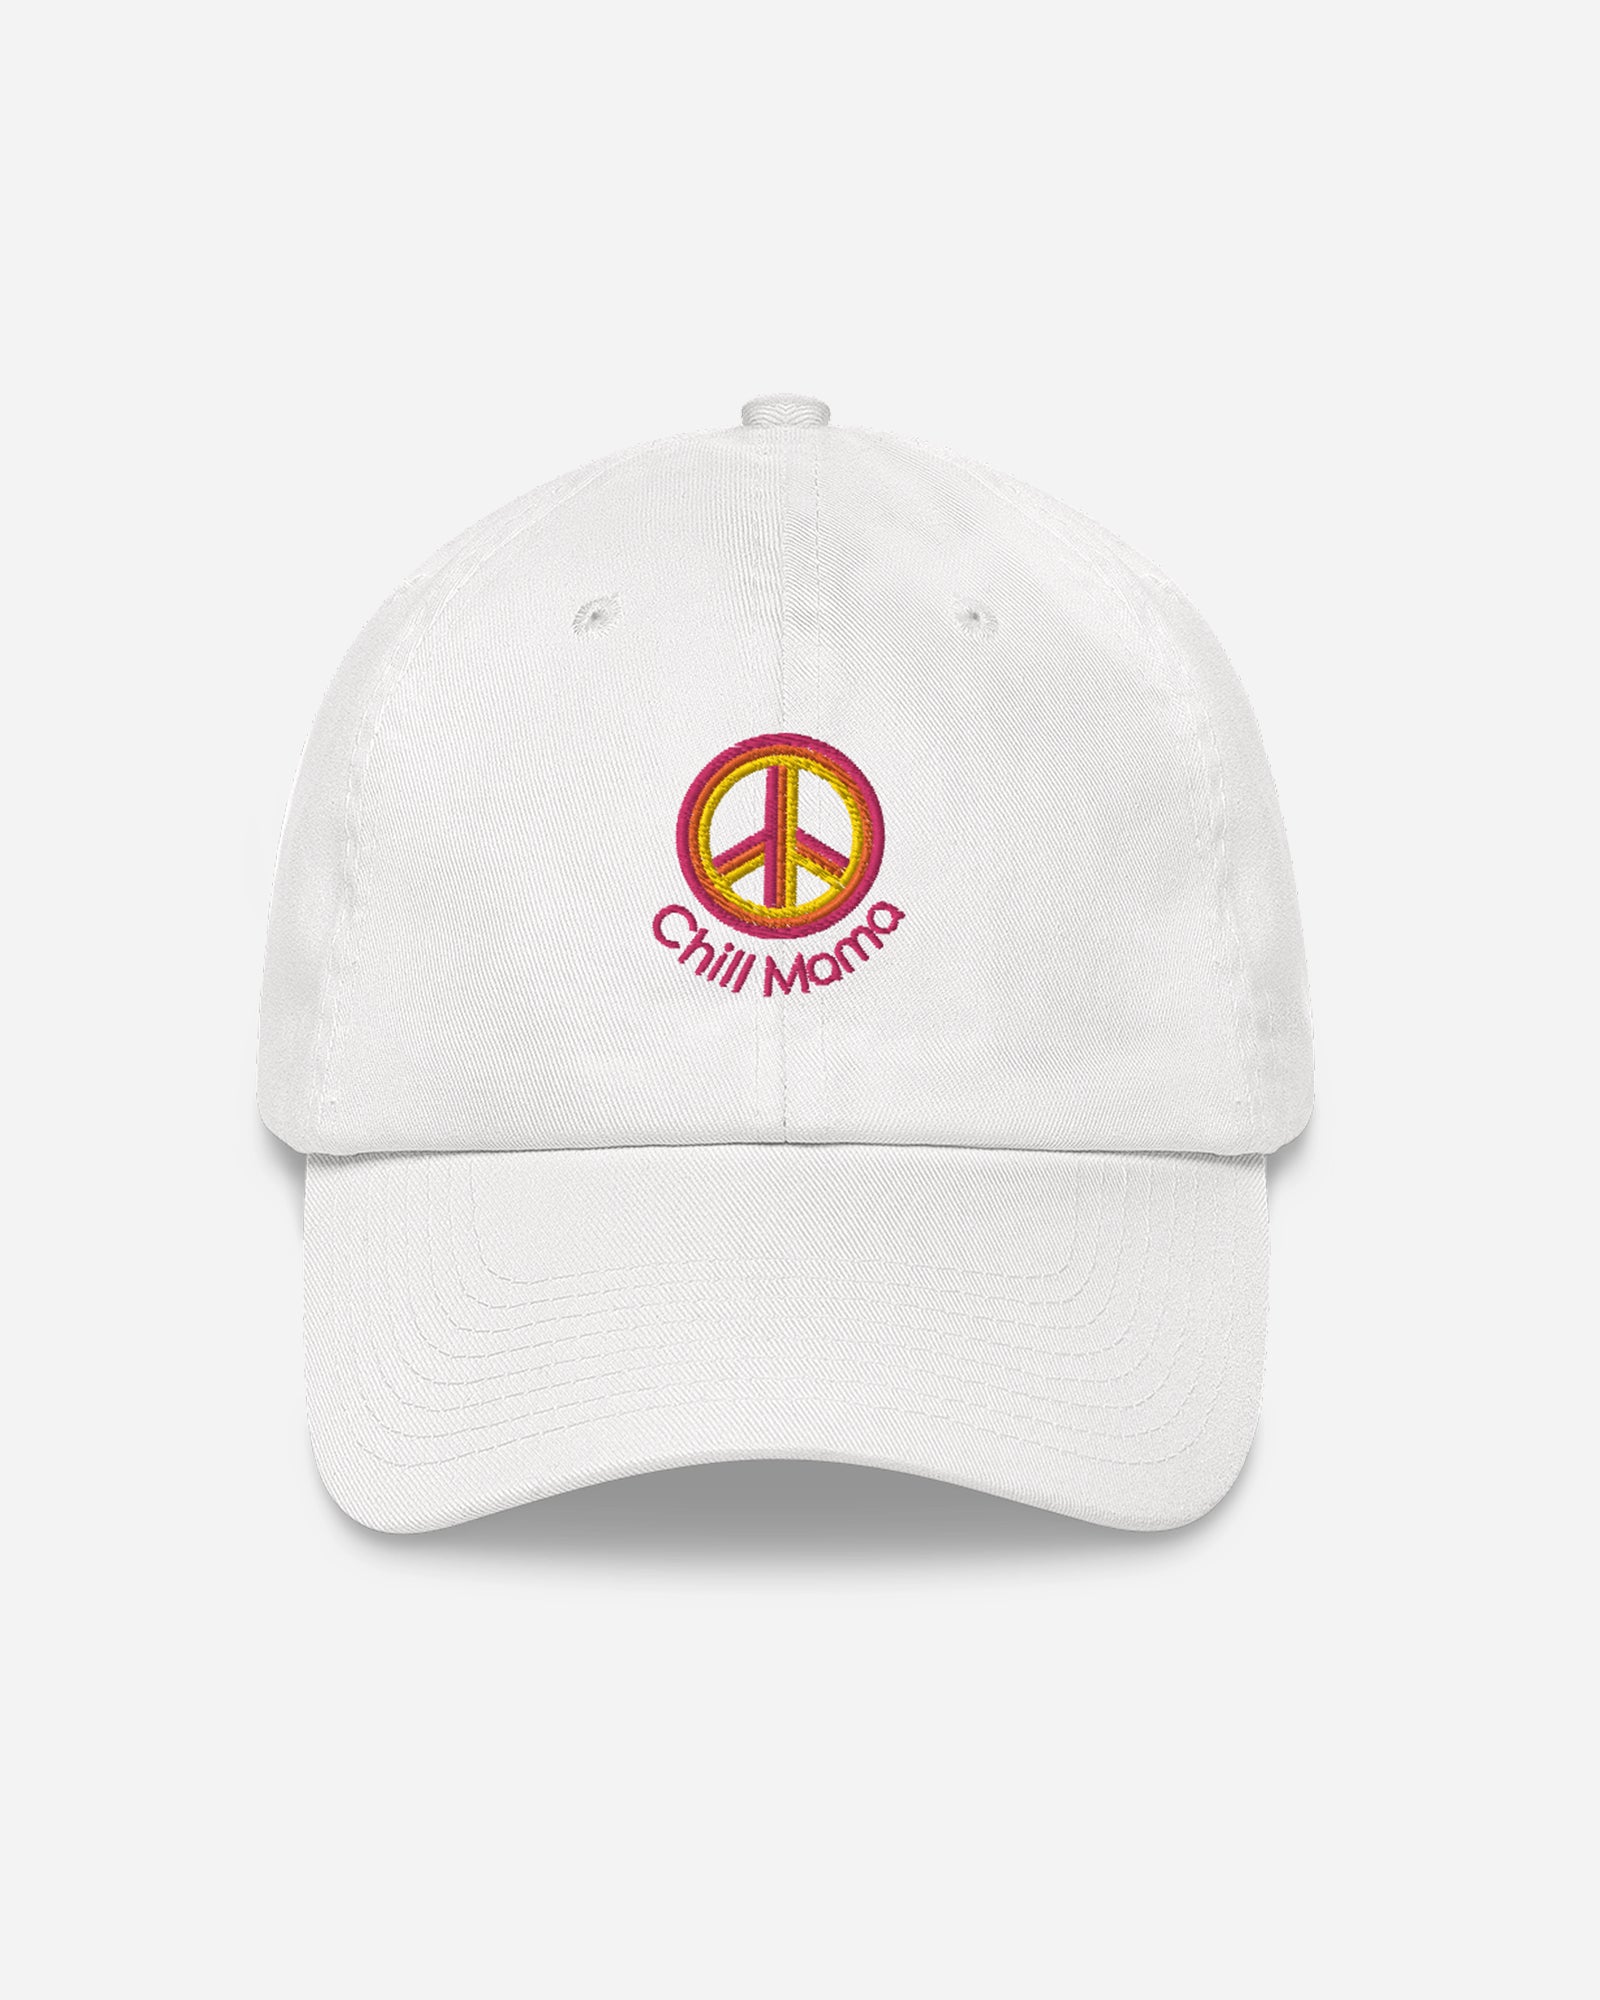 TODAY Chill Mama Embroidered Hat